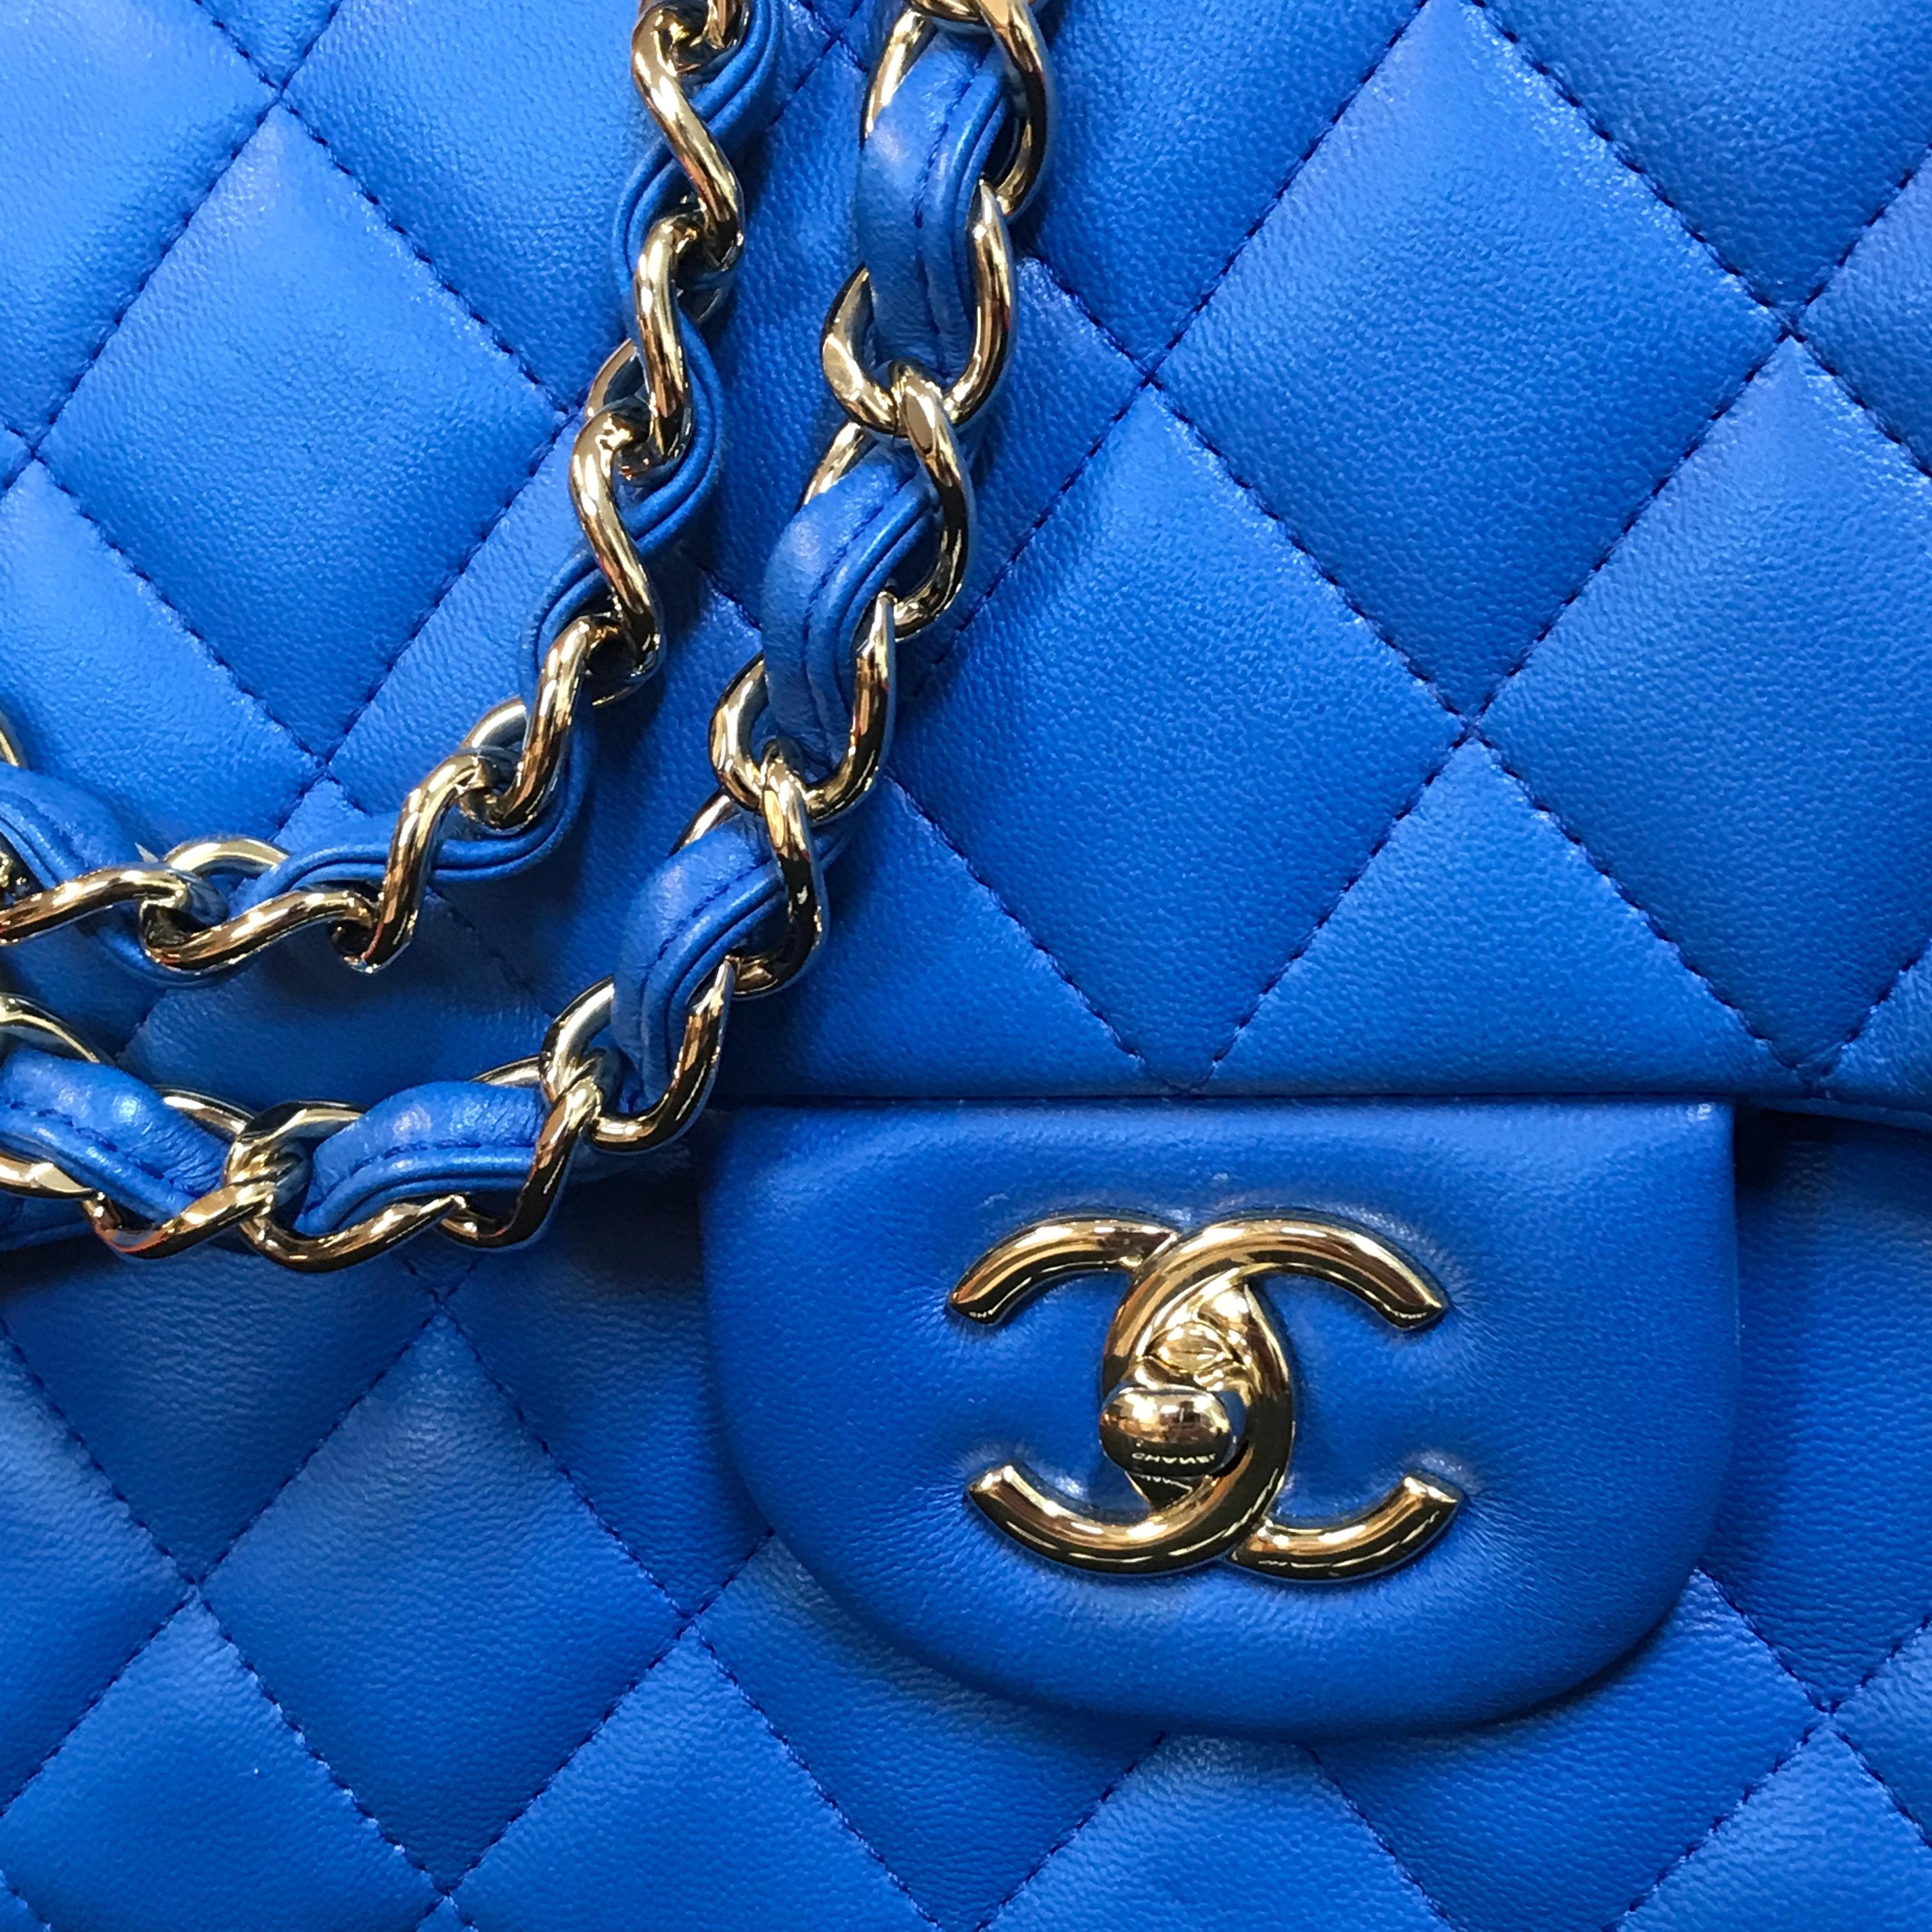 CHANEL double flap bag Jumbo blue shoulder bag quilted lambskin 2016 In Excellent Condition For Sale In Berlin, DE